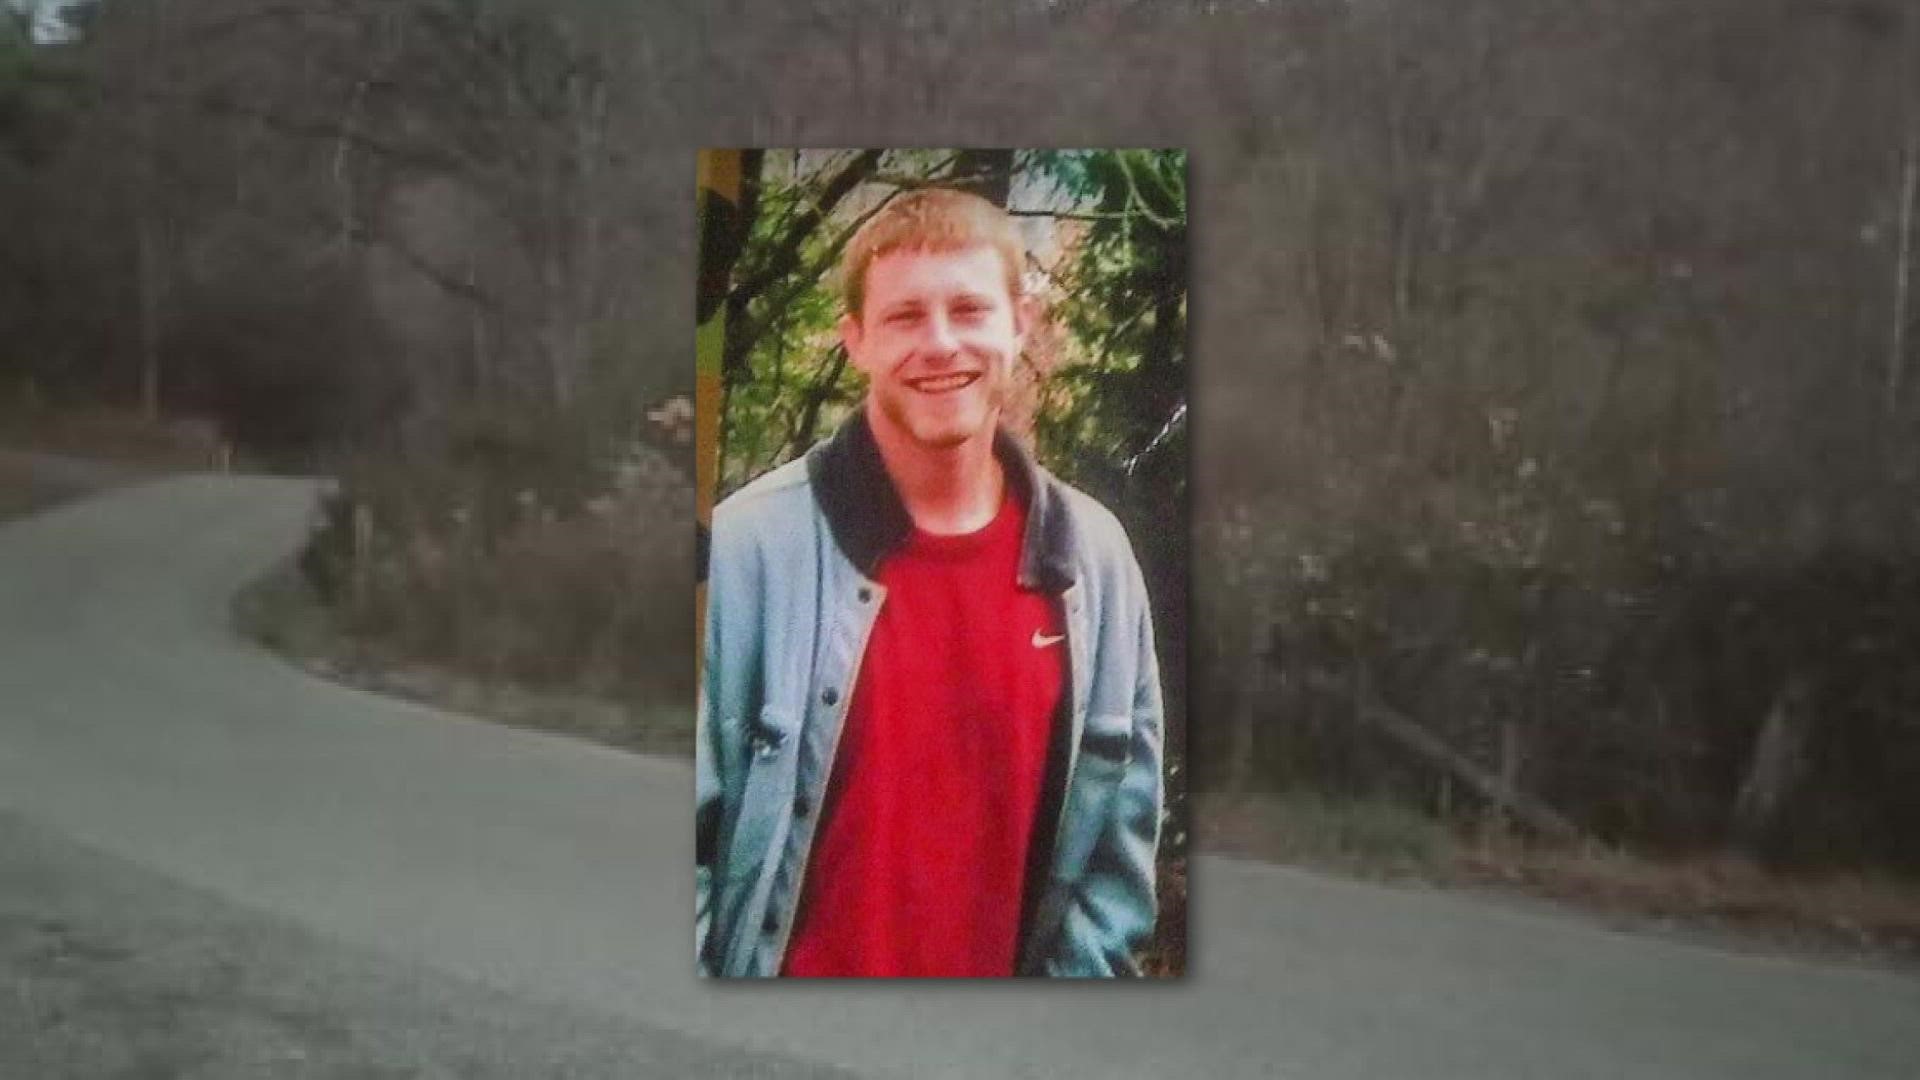 Deputies said Luke Michael "Gator" Butler disappeared in October 2019. A hunter found his remains in a wooded area outside Madisonville three years later.